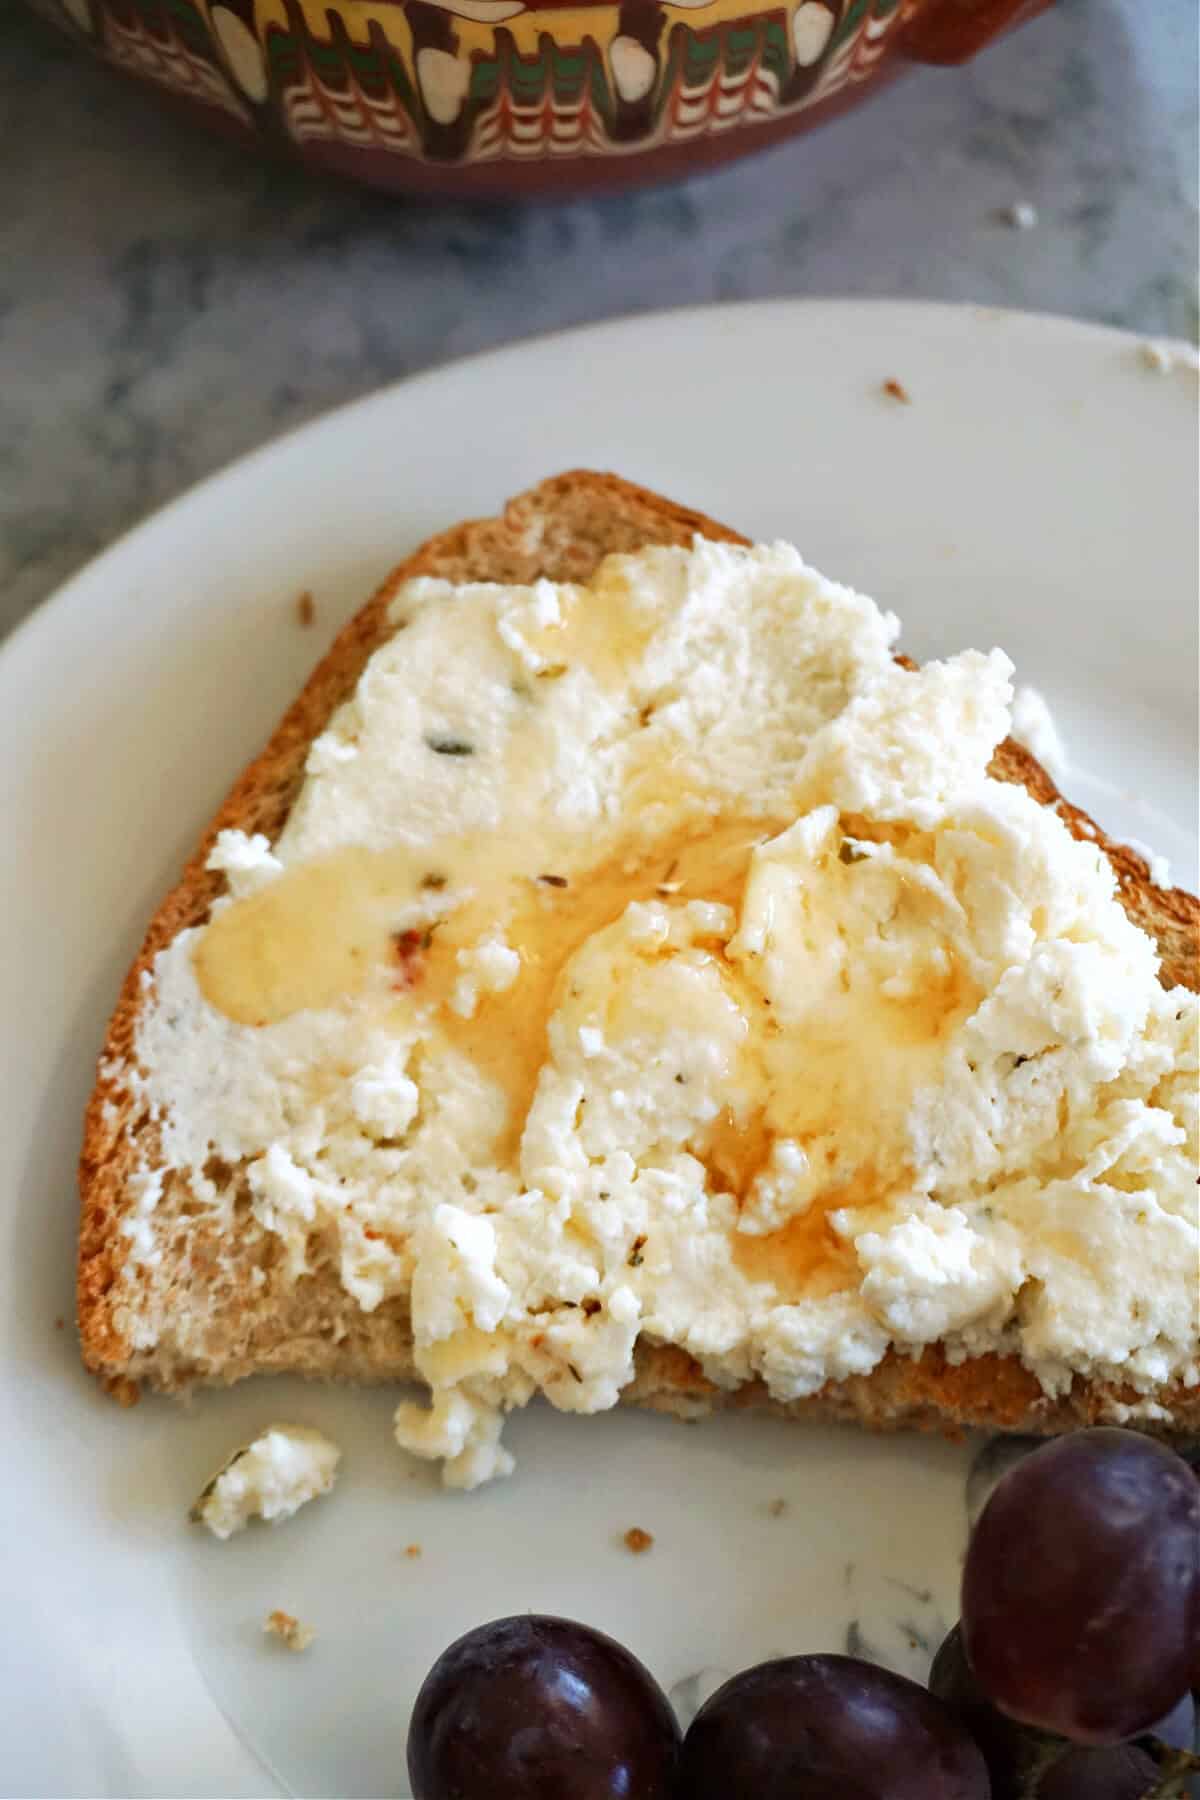 Half a slice of toast with ricotta and honey.